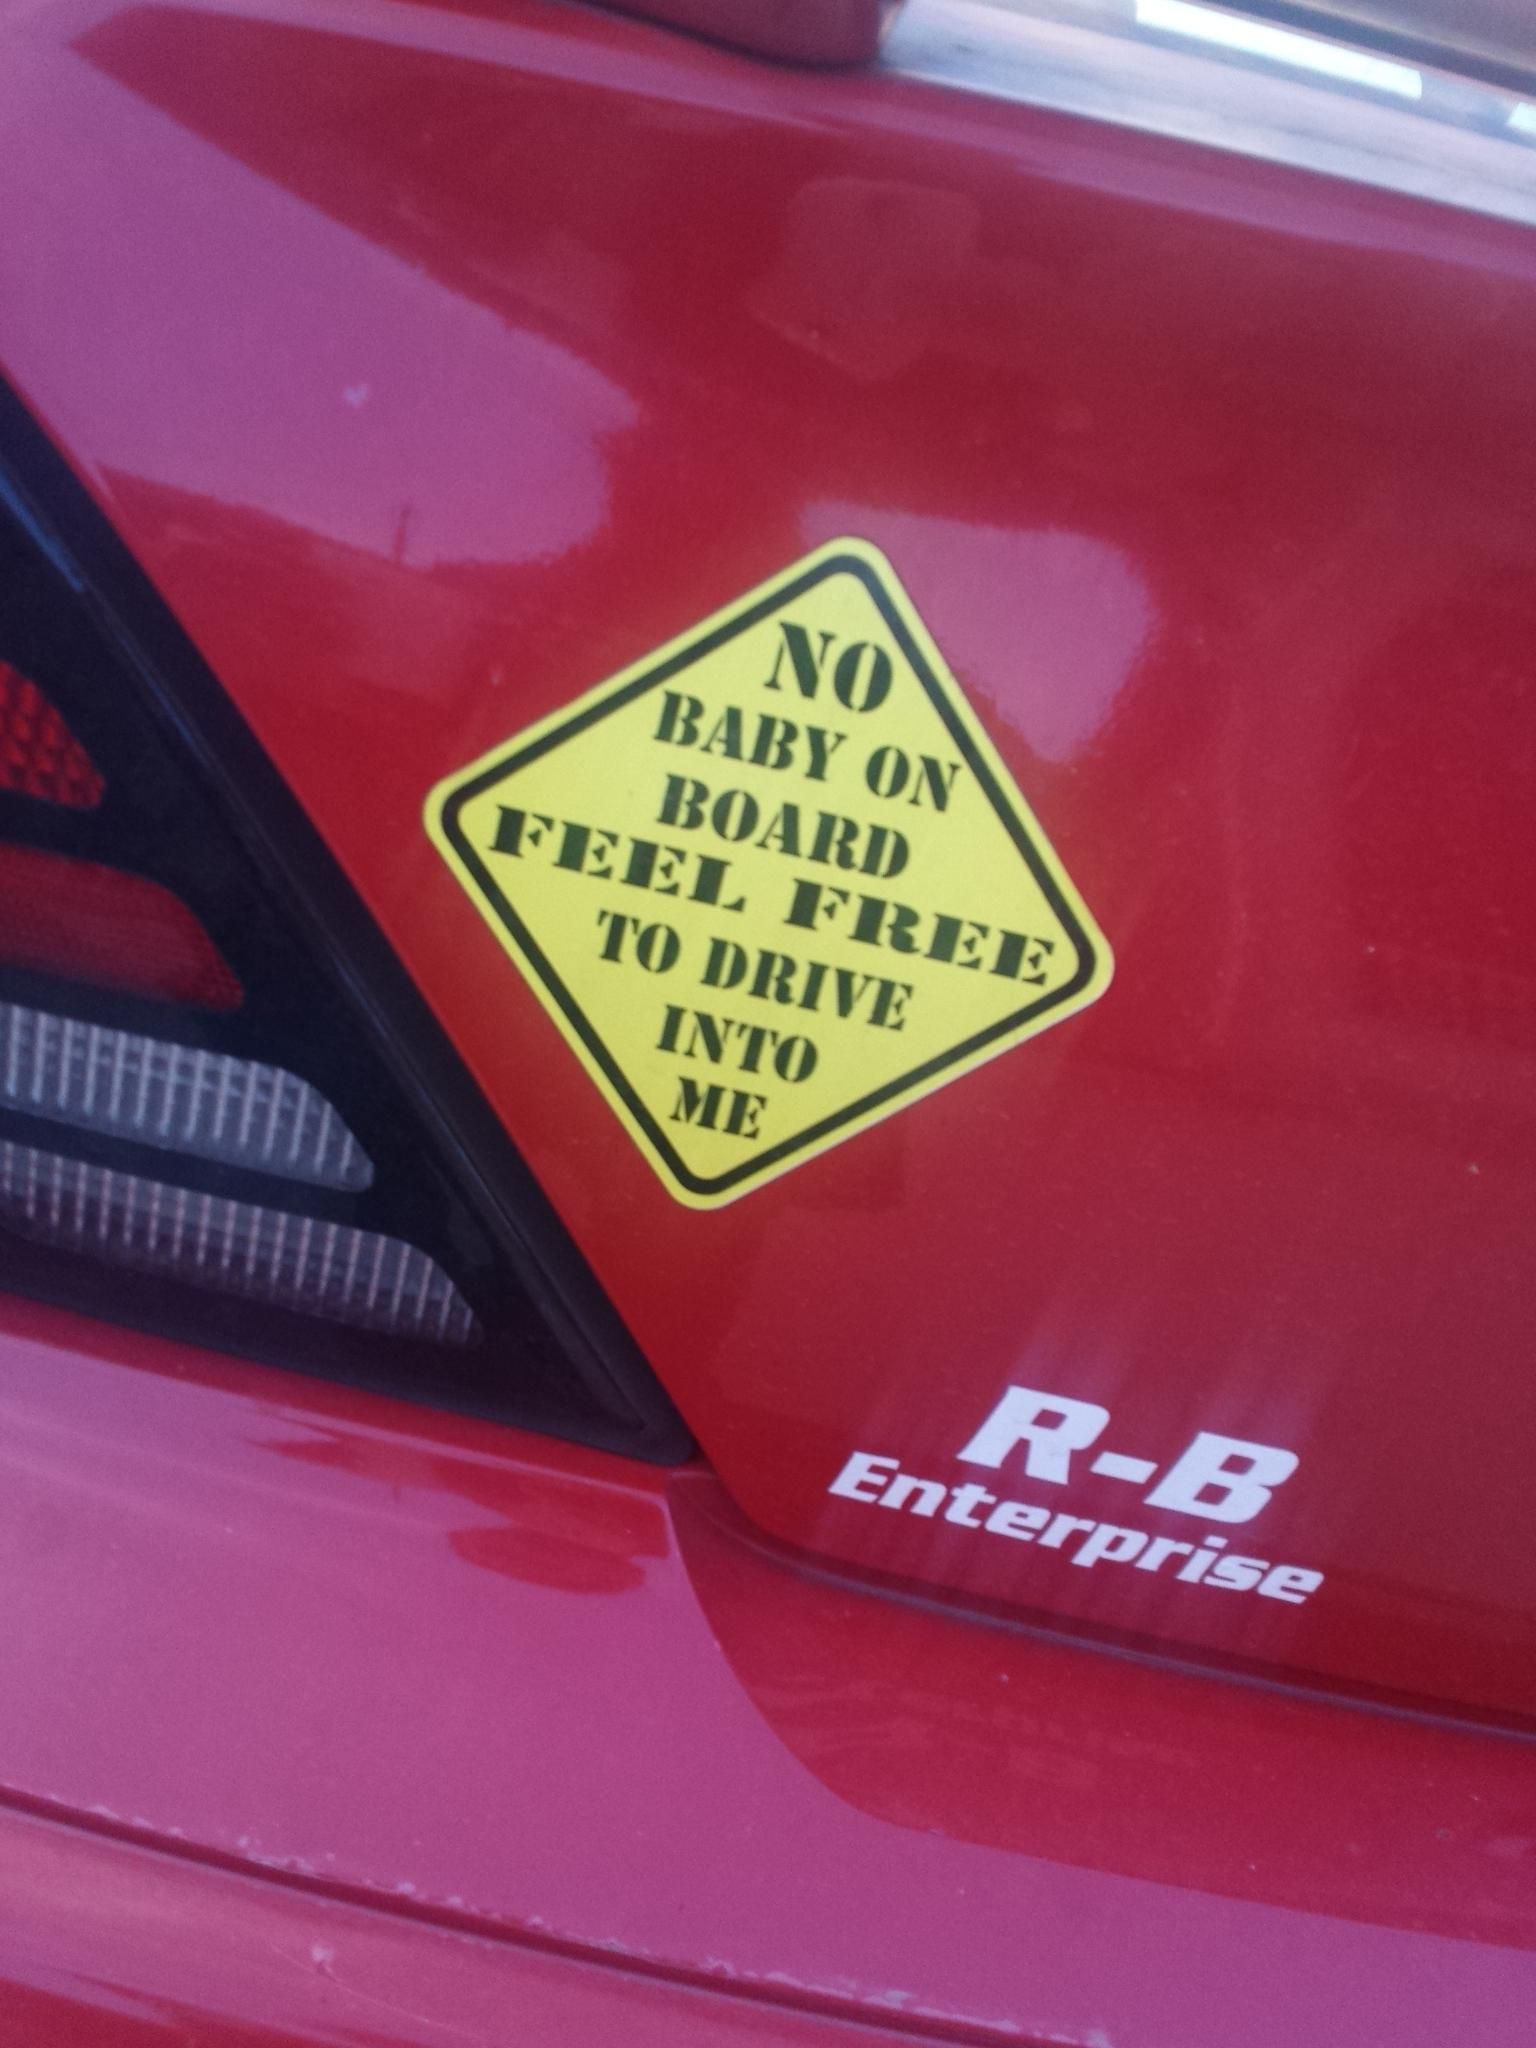 No baby on board.